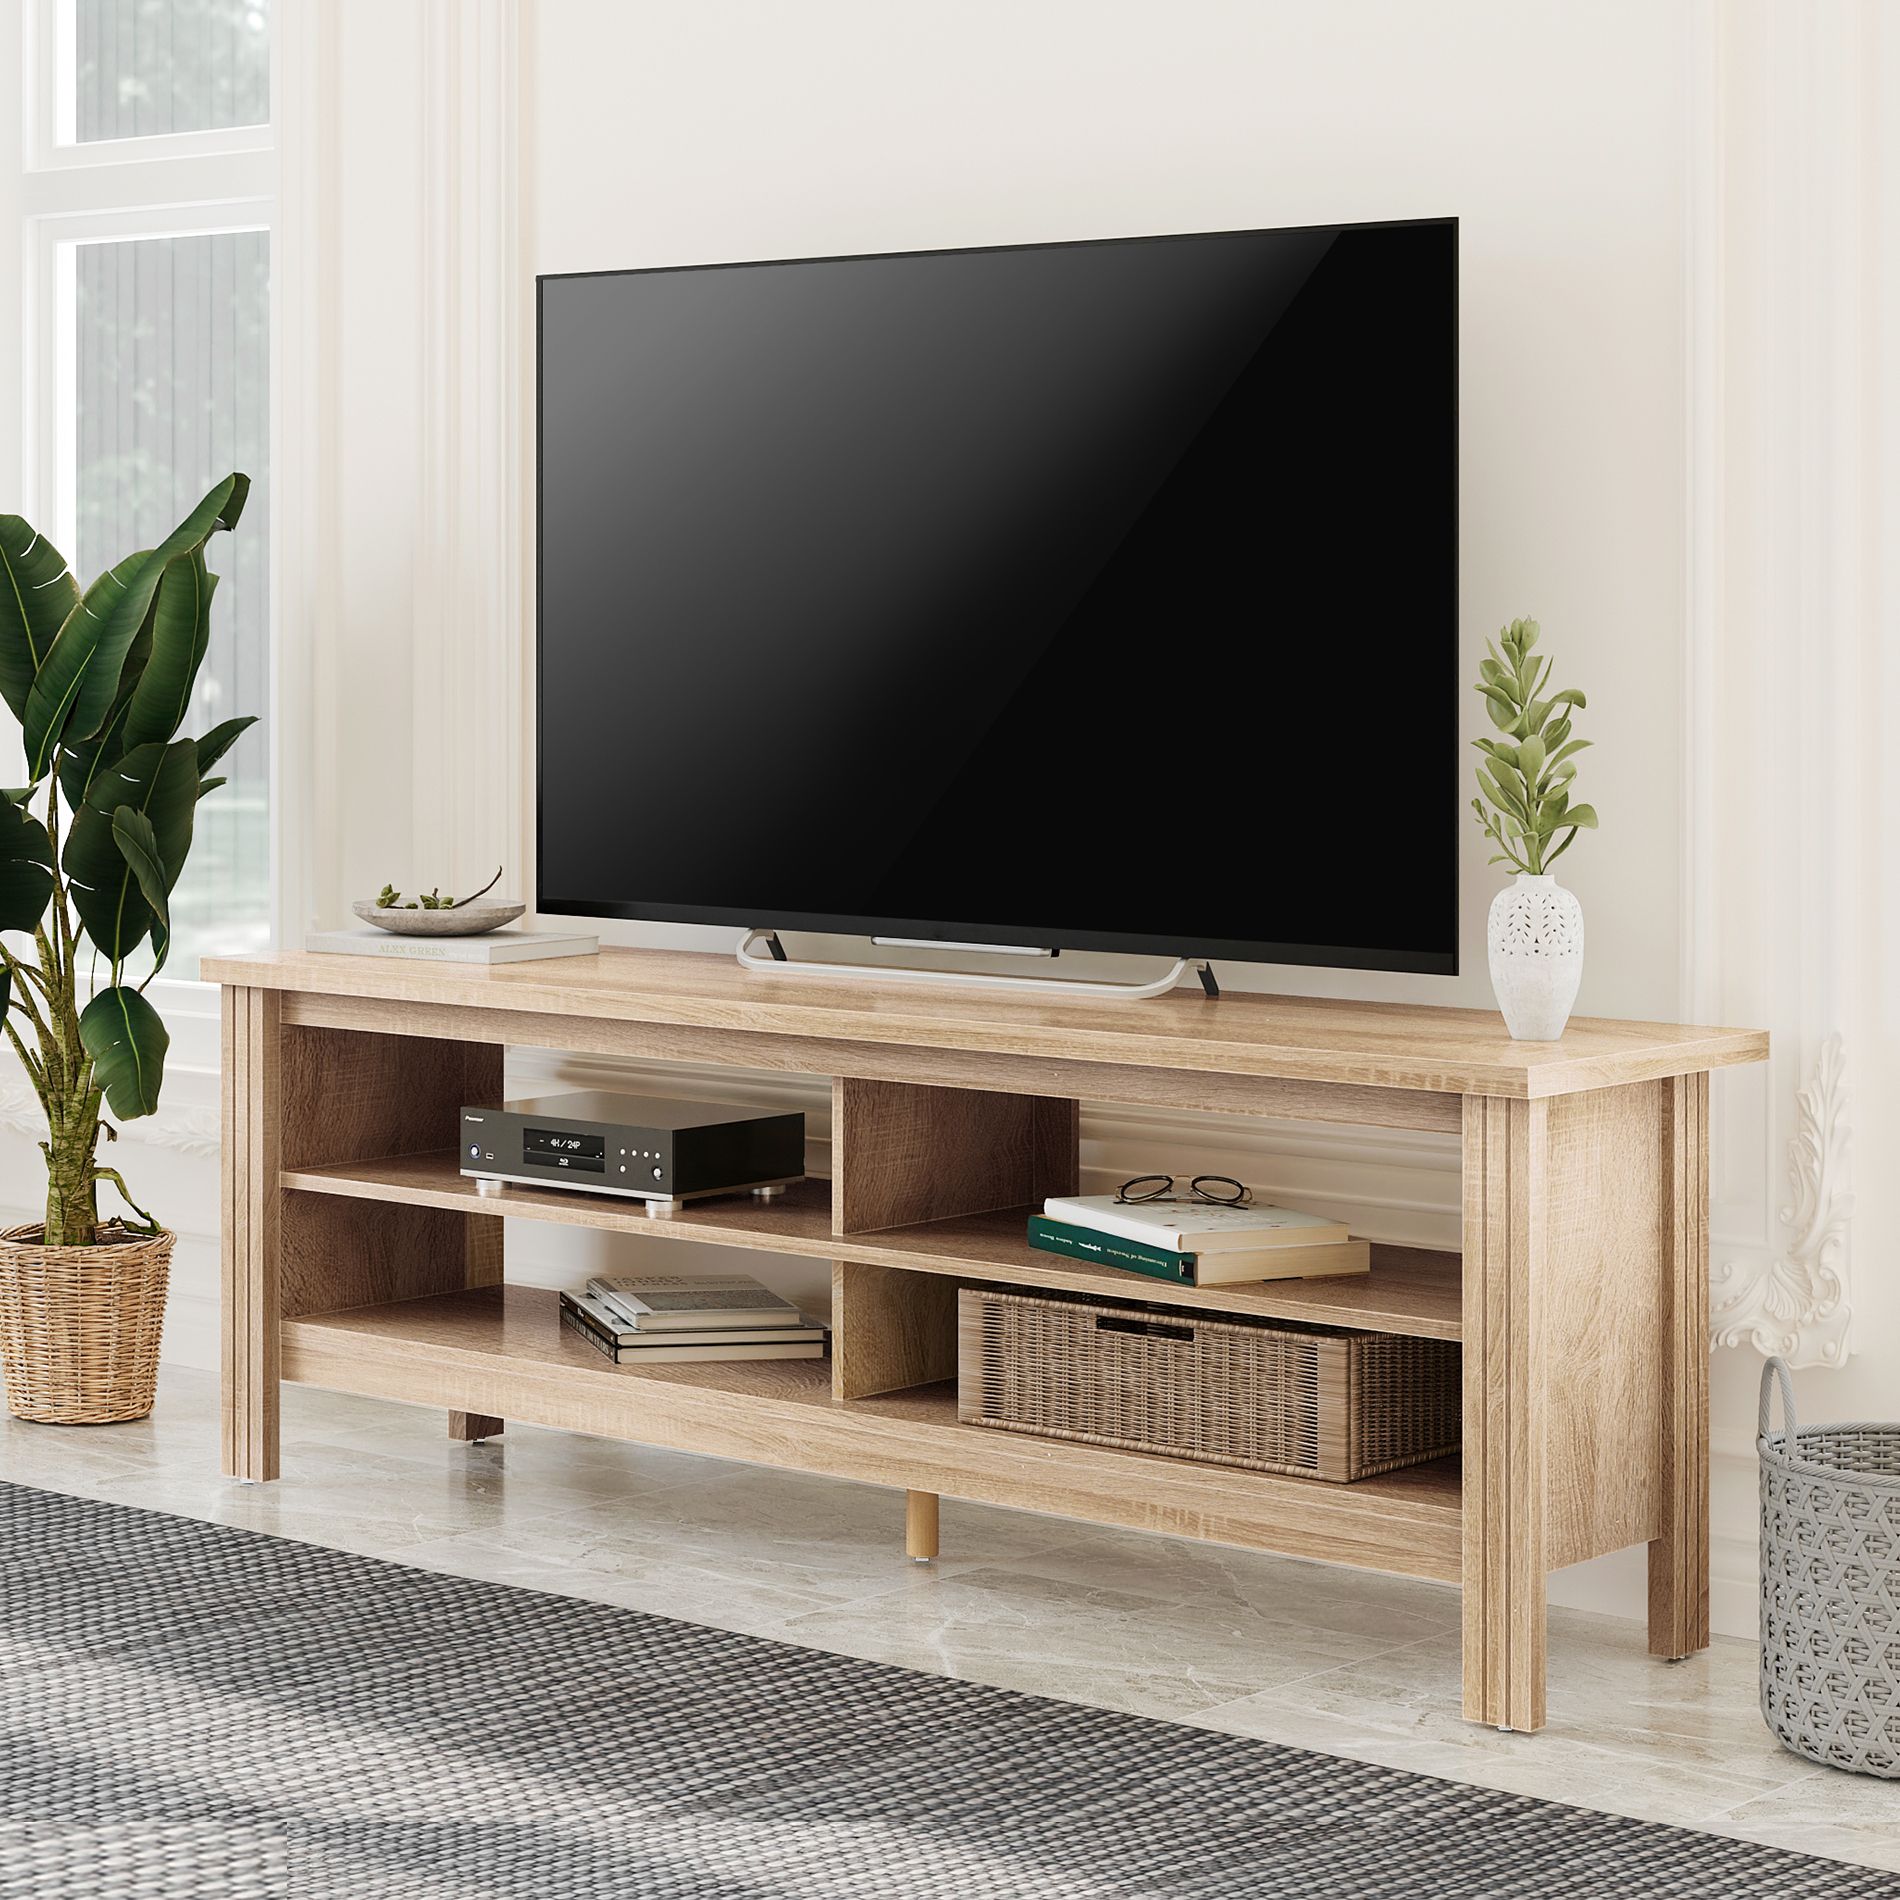 Wampat Farmhouse Tv Stand For 65 Inch Flat Screen, Living With Oak Tv Stands For Flat Screen (Photo 11 of 15)